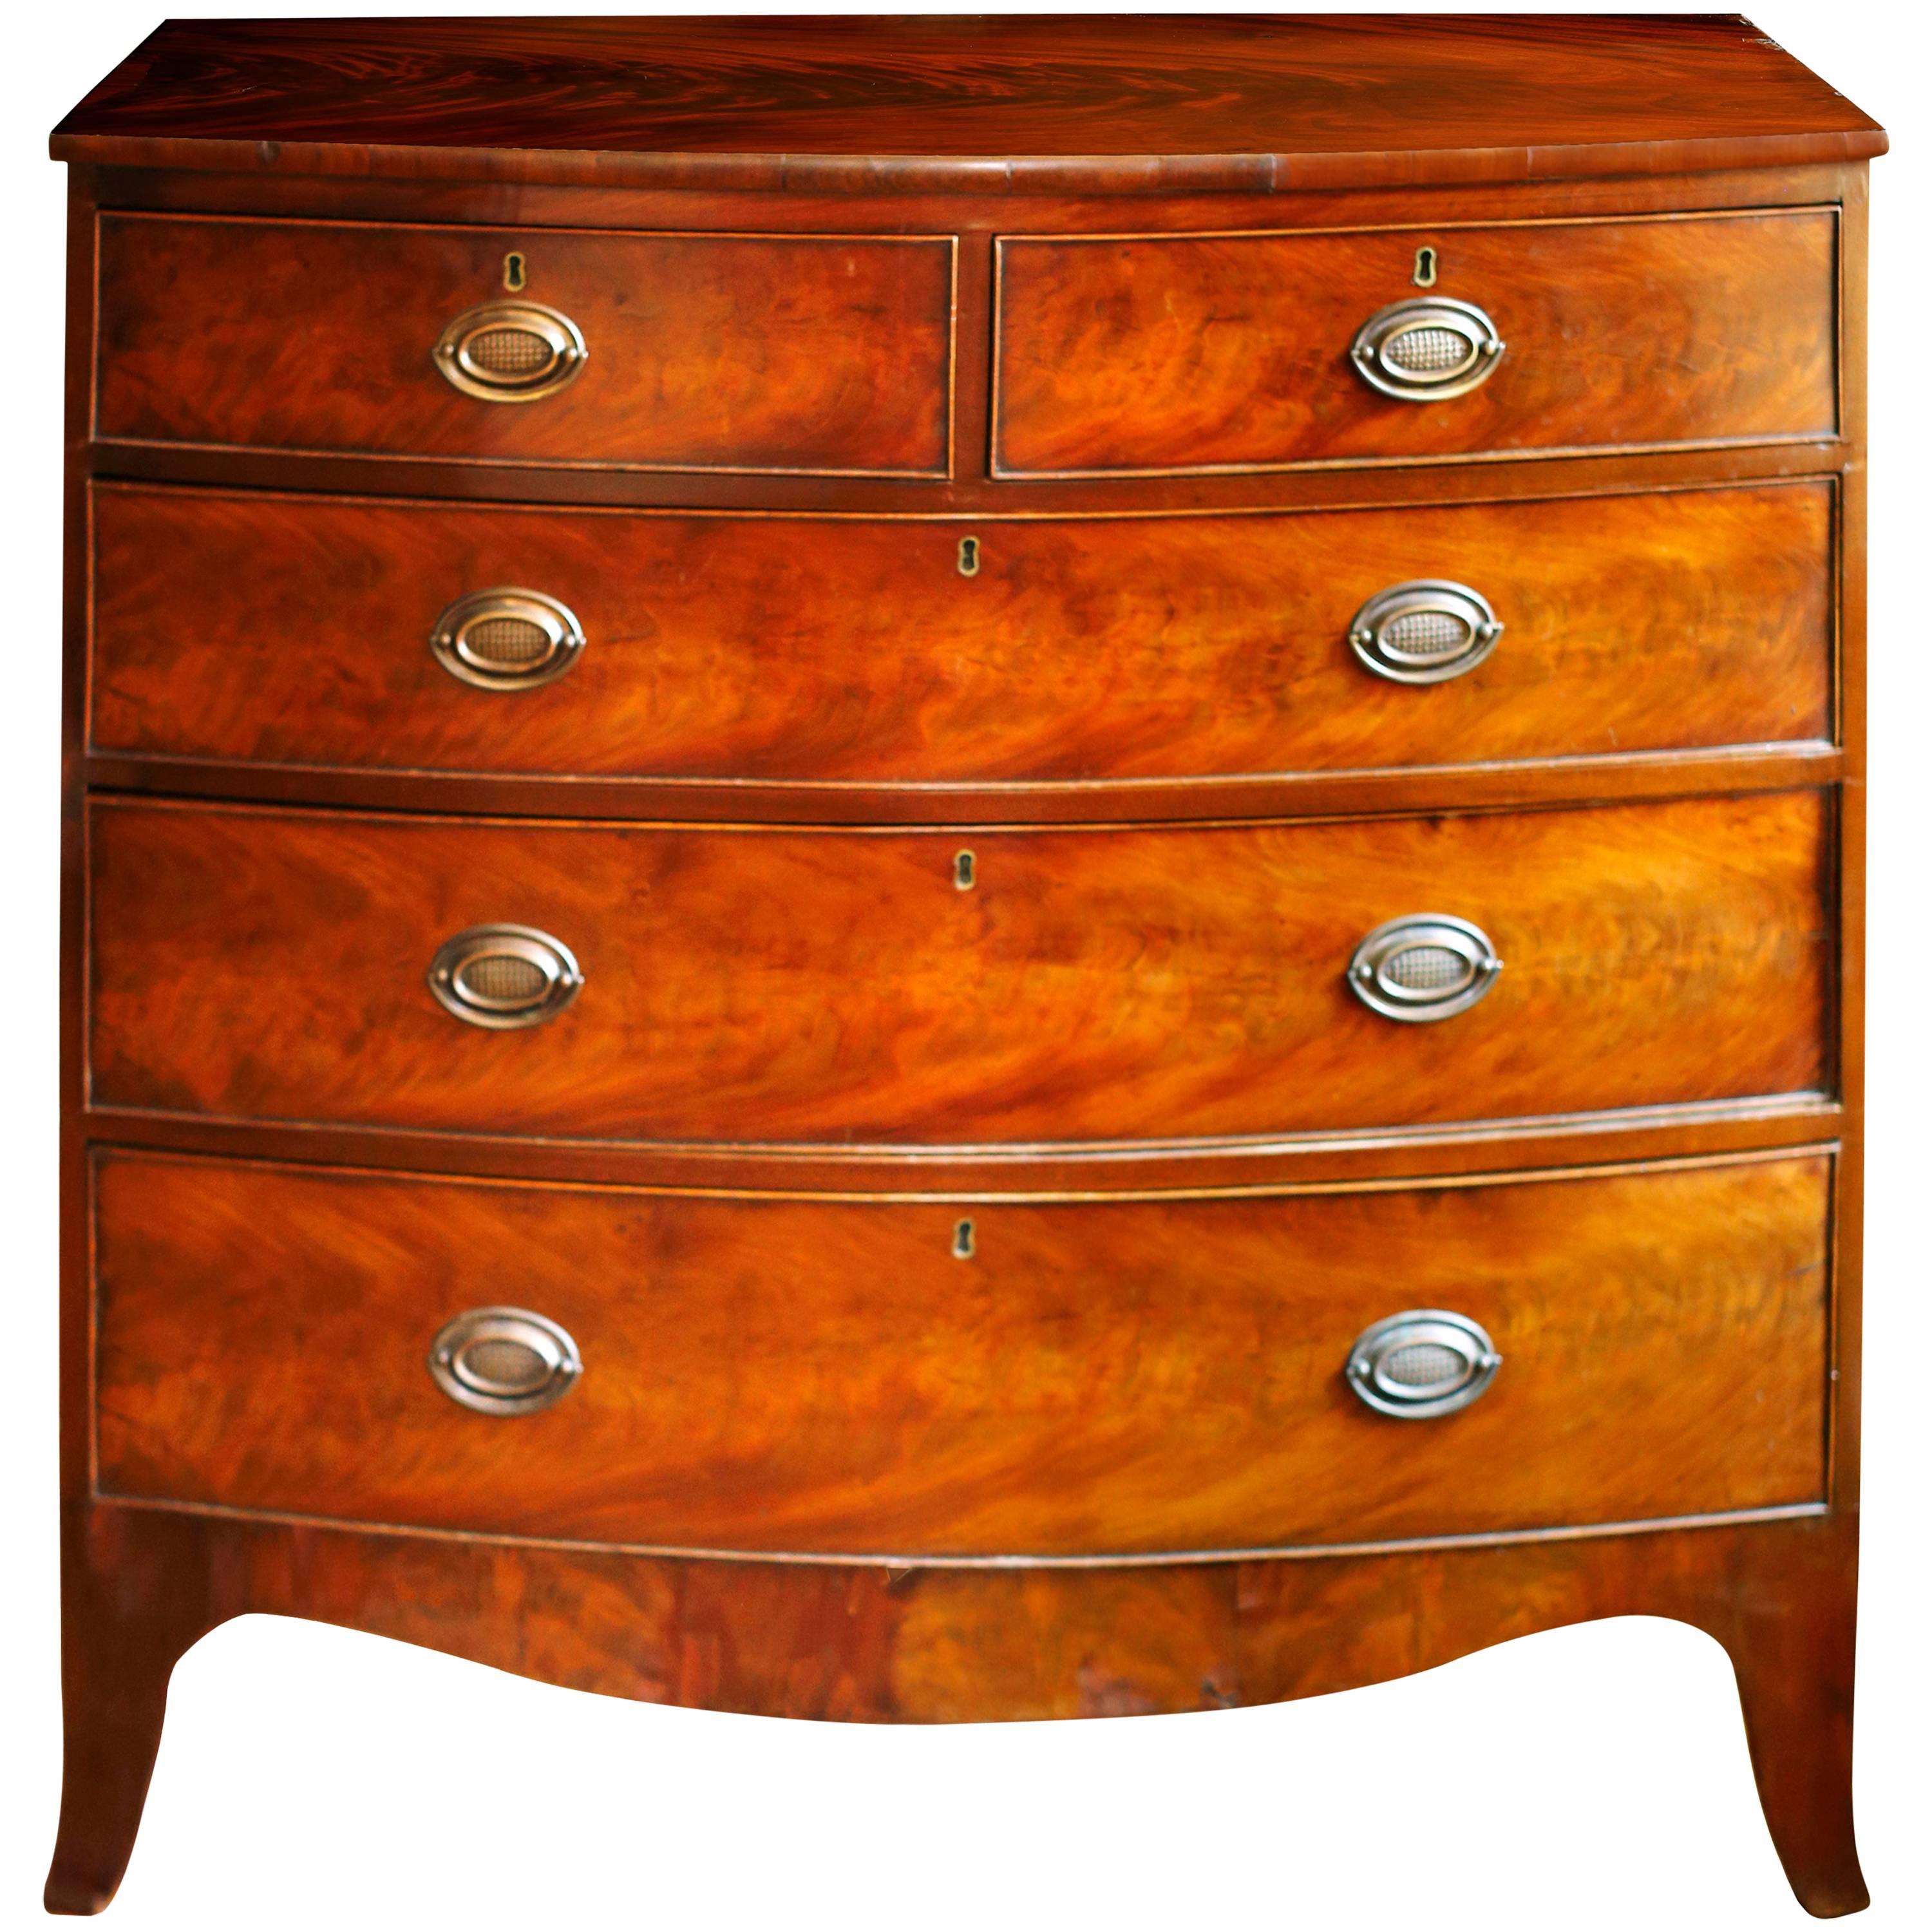 Late 18th Century Georgian Bow Front Chest in Flame Mahogany